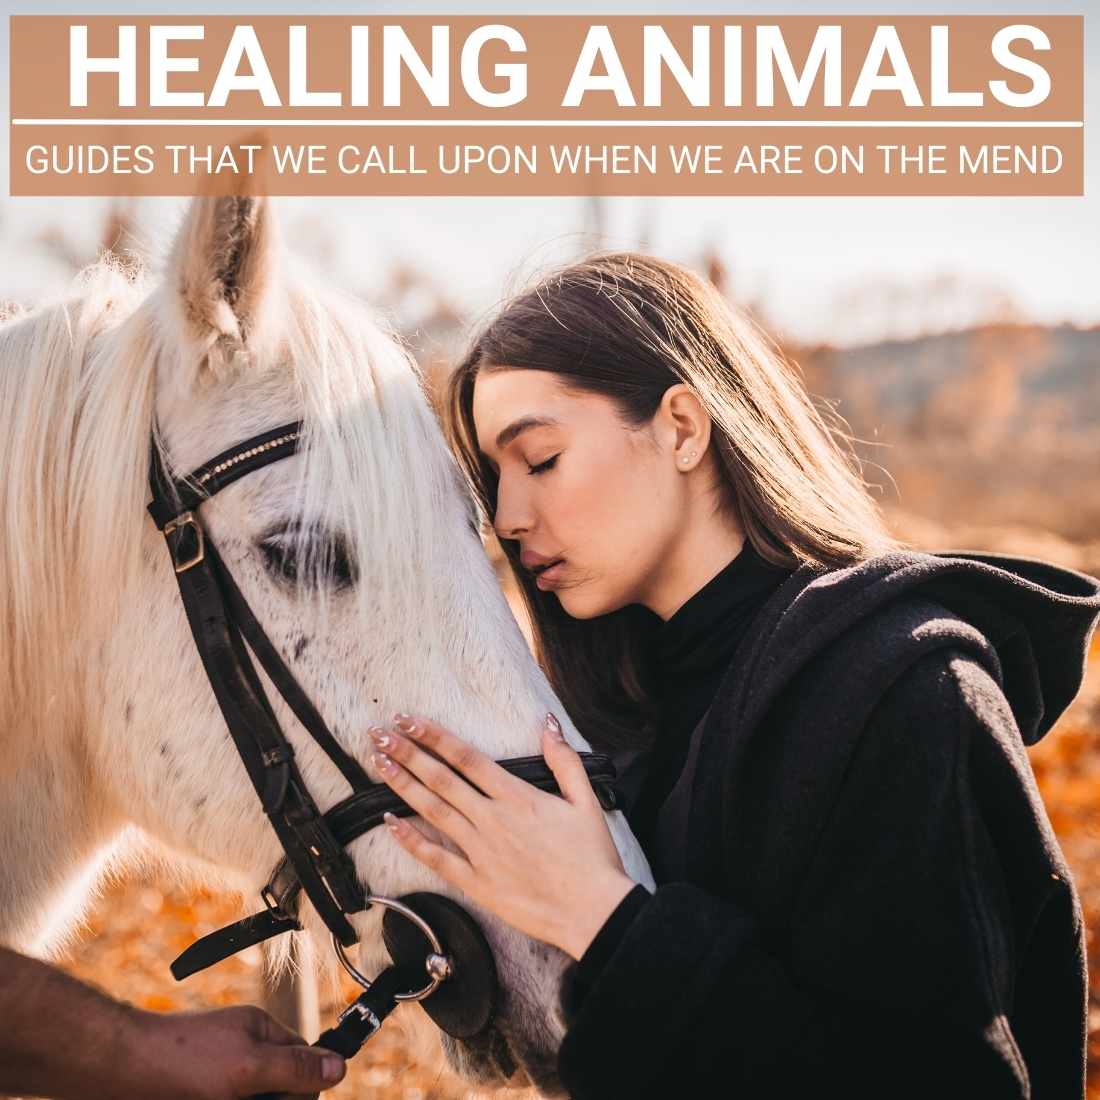 Animals That Represent Healing: Guide With The Top 9 Animals